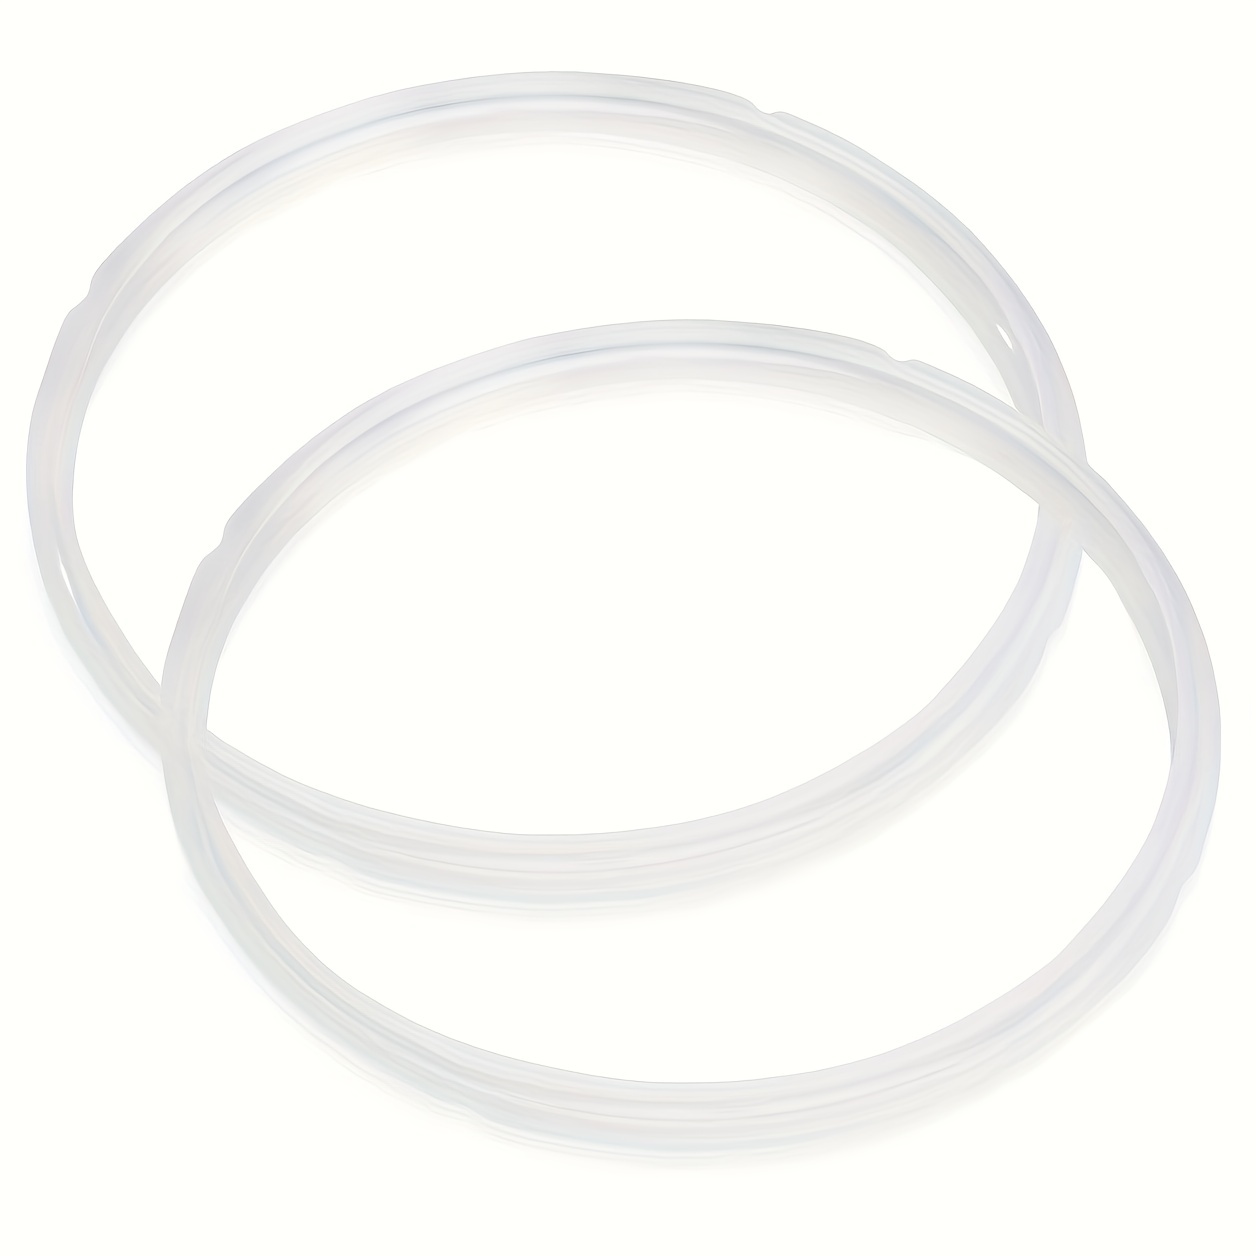 3pcs New Silicone Gasket Seal Rings For Instant Pot IP-DUO60 IP-DUO50  IP-LUX60